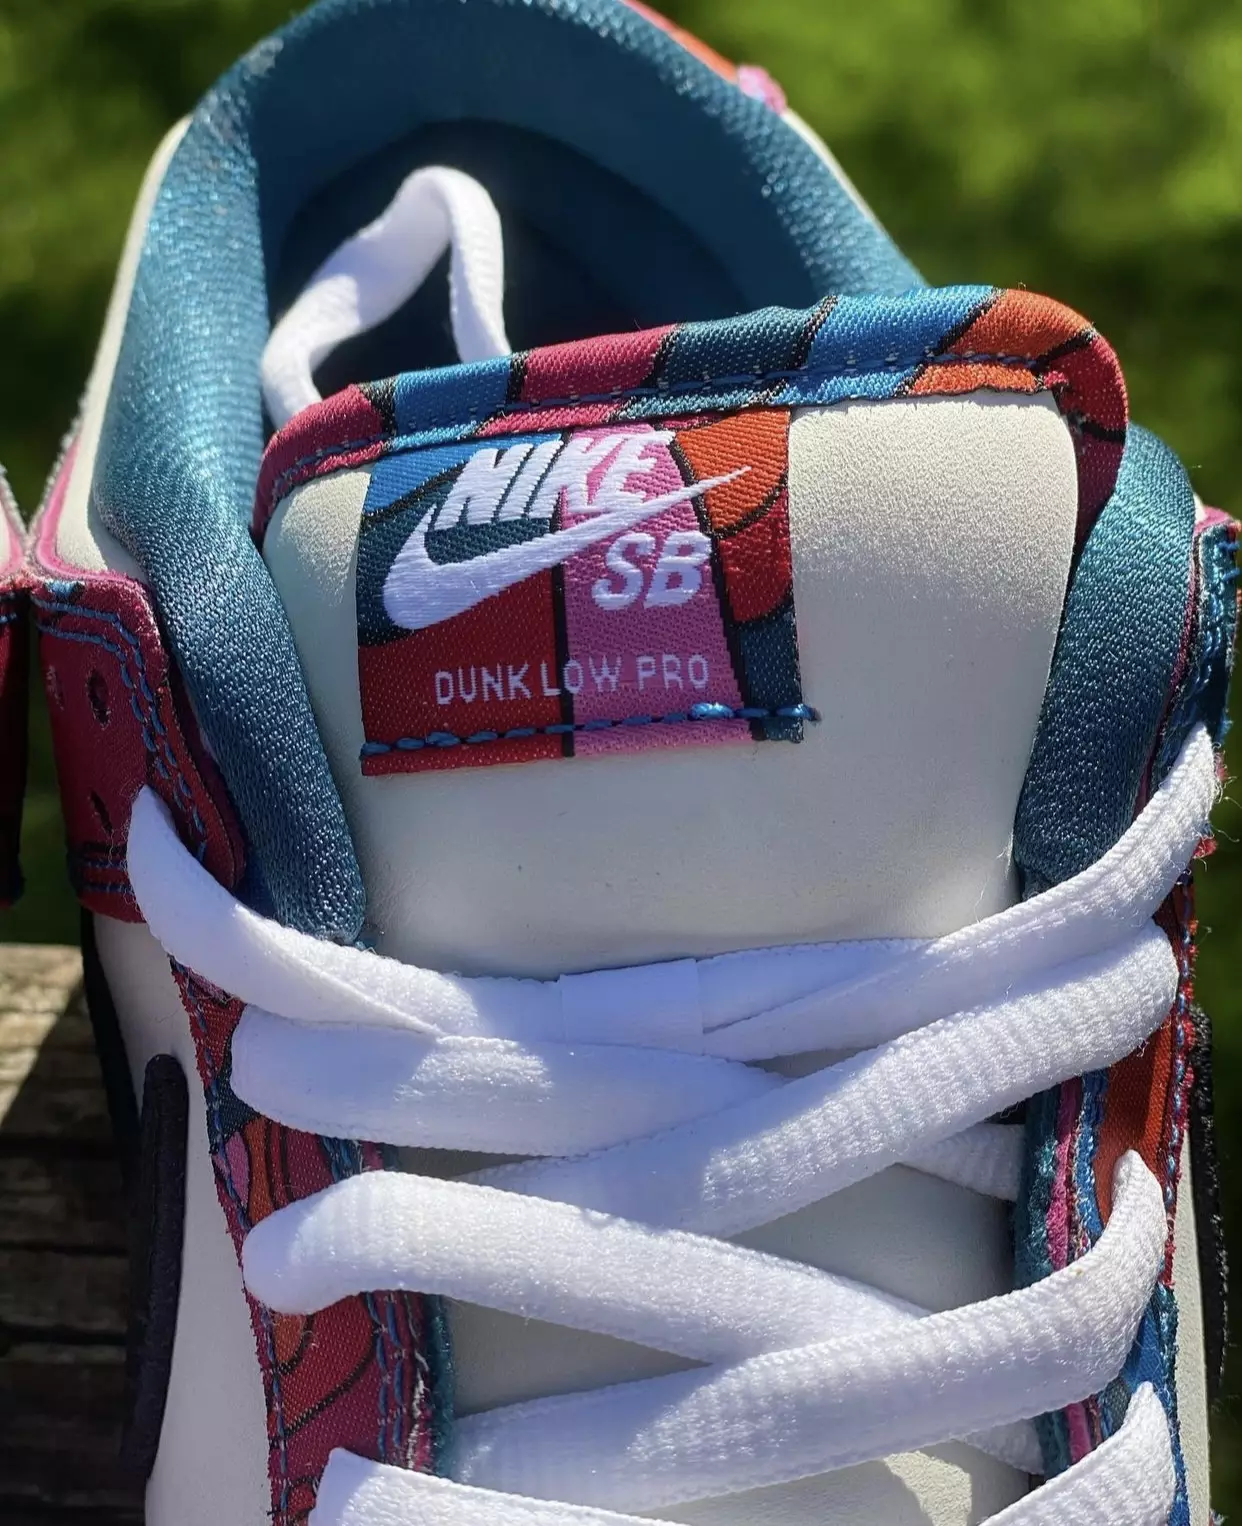 Parra x Nike SB Dunk Low DH7695-102 Udgivelsesdato